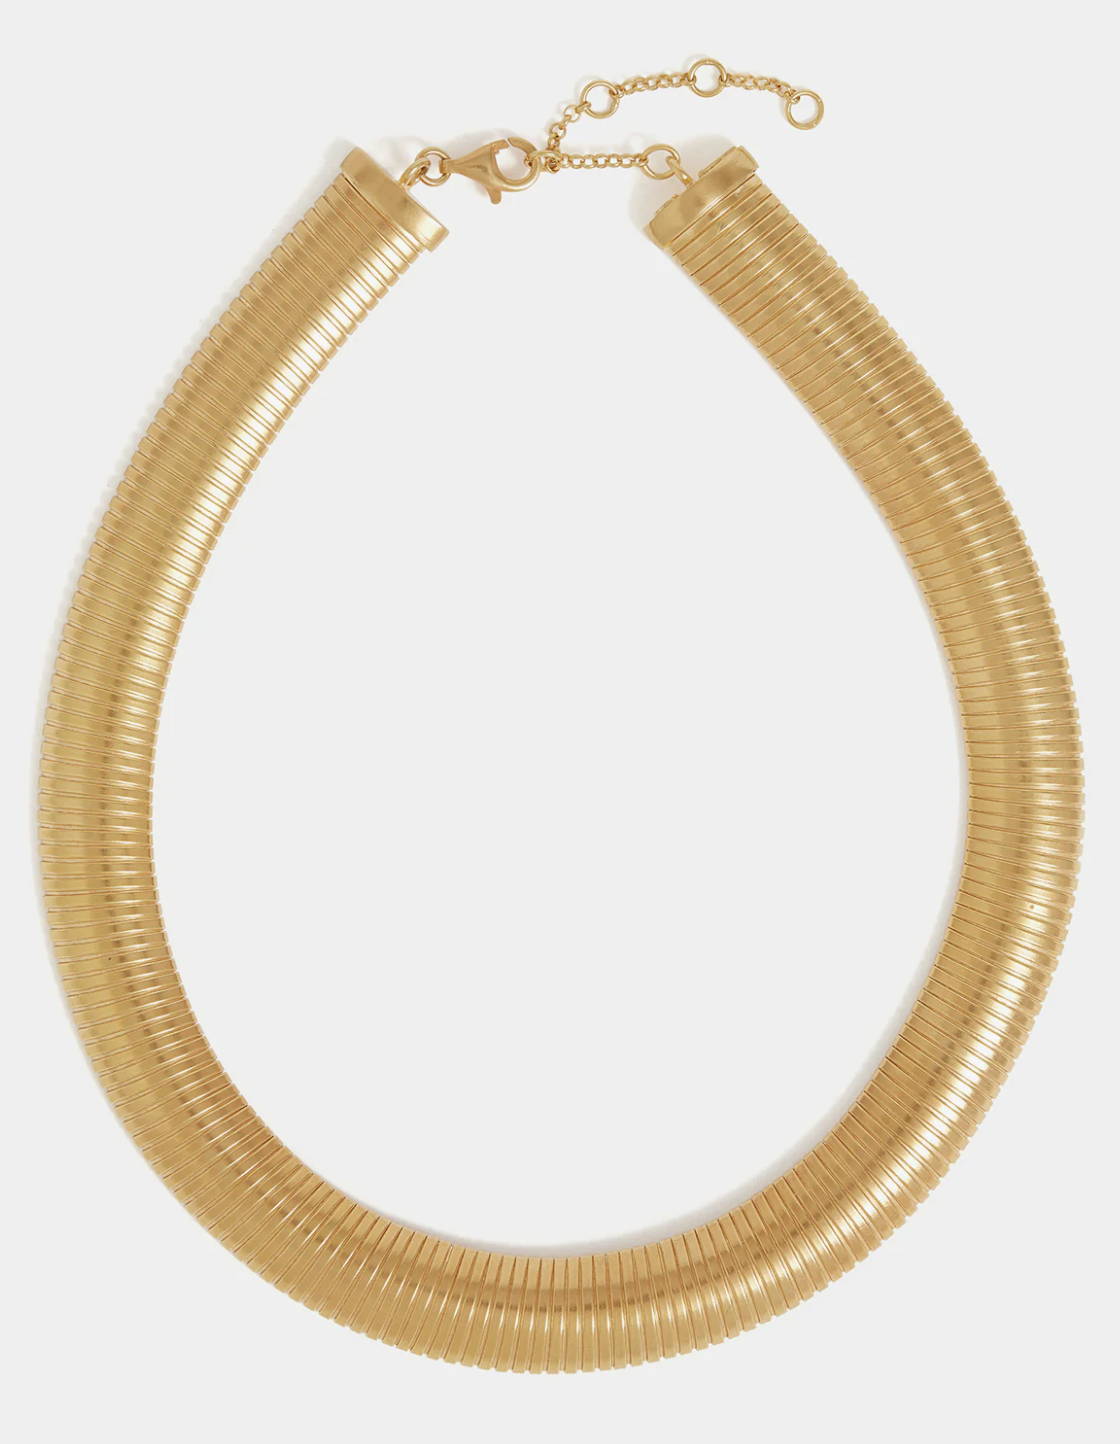 SORU JEWELLERY SOMETING NAVY ARIELLE CHARNAS GOLD SNAKE CHAIN NECKLACE chunky 18ct gold plated brass